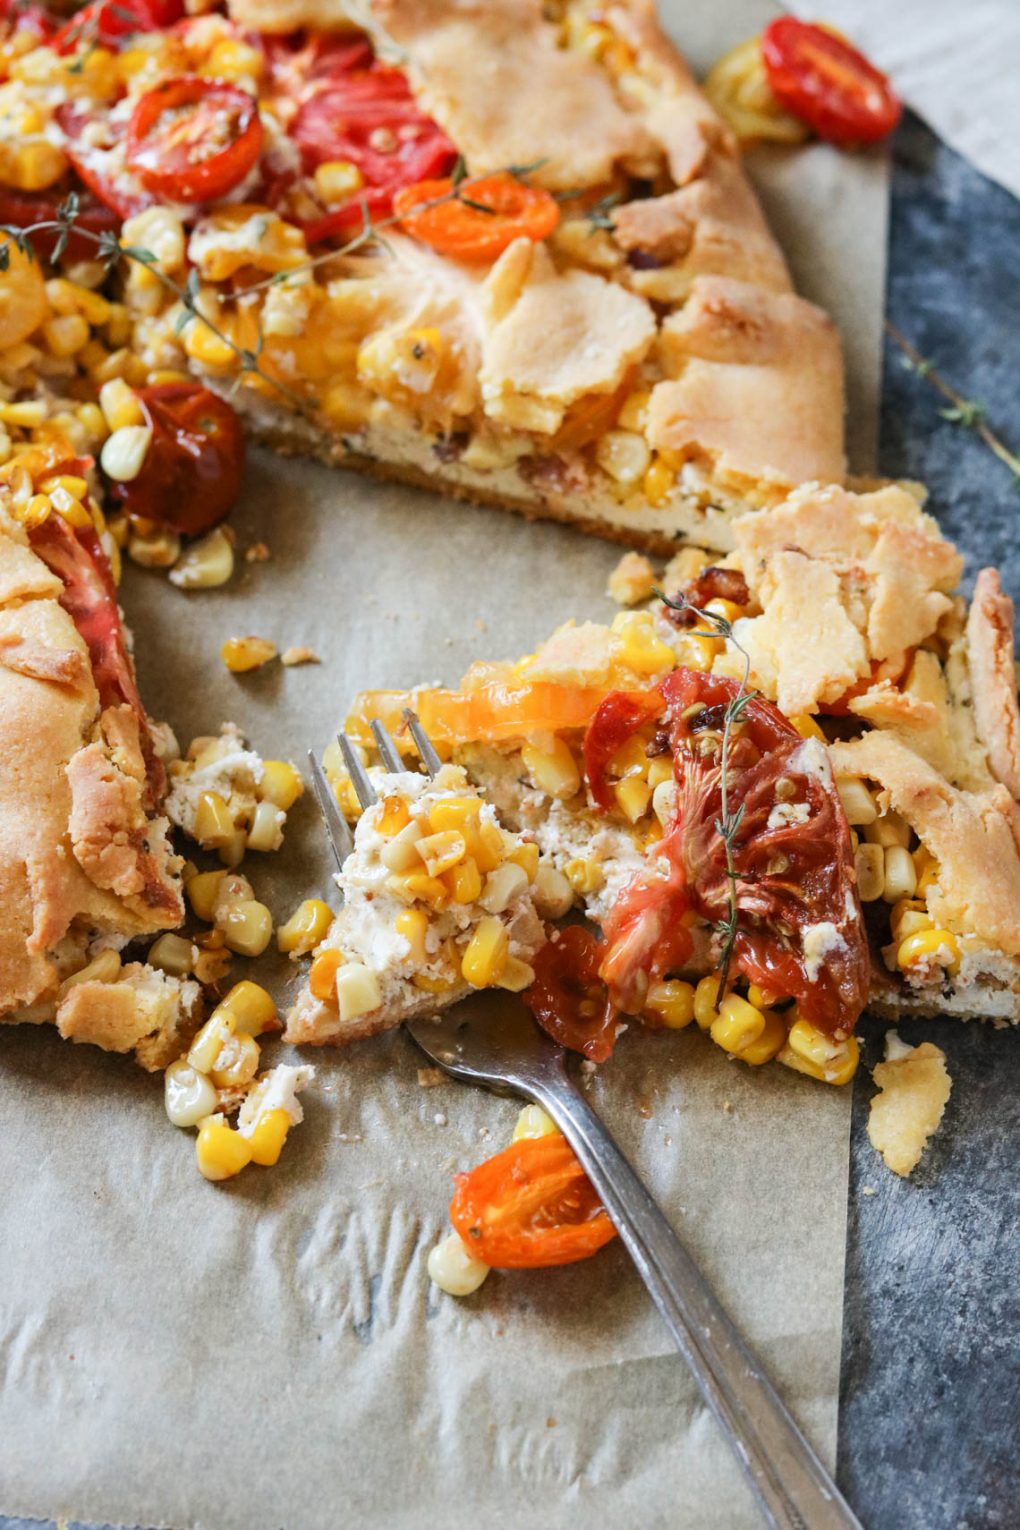 Heirloom tomato and corn savory galette